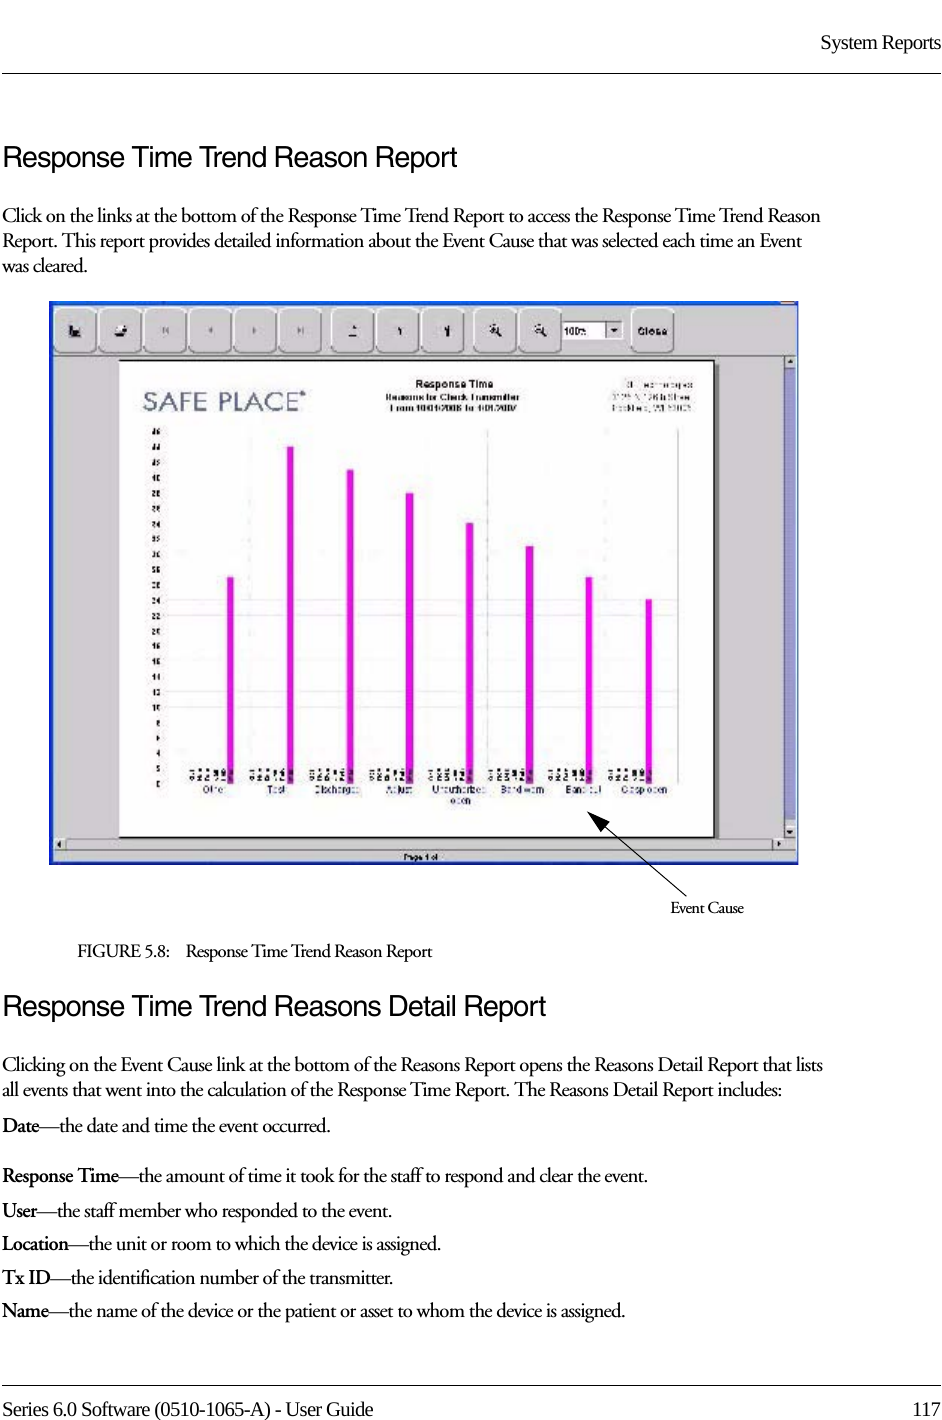 Series 6.0 Software (0510-1065-A) - User Guide  117System ReportsResponse Time Trend Reason ReportClick on the links at the bottom of the Response Time Trend Report to access the Response Time Trend Reason Report. This report provides detailed information about the Event Cause that was selected each time an Event was cleared. FIGURE 5.8:    Response Time Trend Reason ReportResponse Time Trend Reasons Detail ReportClicking on the Event Cause link at the bottom of the Reasons Report opens the Reasons Detail Report that lists all events that went into the calculation of the Response Time Report. The Reasons Detail Report includes:Date—the date and time the event occurred.Response Time—the amount of time it took for the staff to respond and clear the event.User—the staff member who responded to the event. Location—the unit or room to which the device is assigned.Tx ID—the identification number of the transmitter.Name—the name of the device or the patient or asset to whom the device is assigned.Event Cause